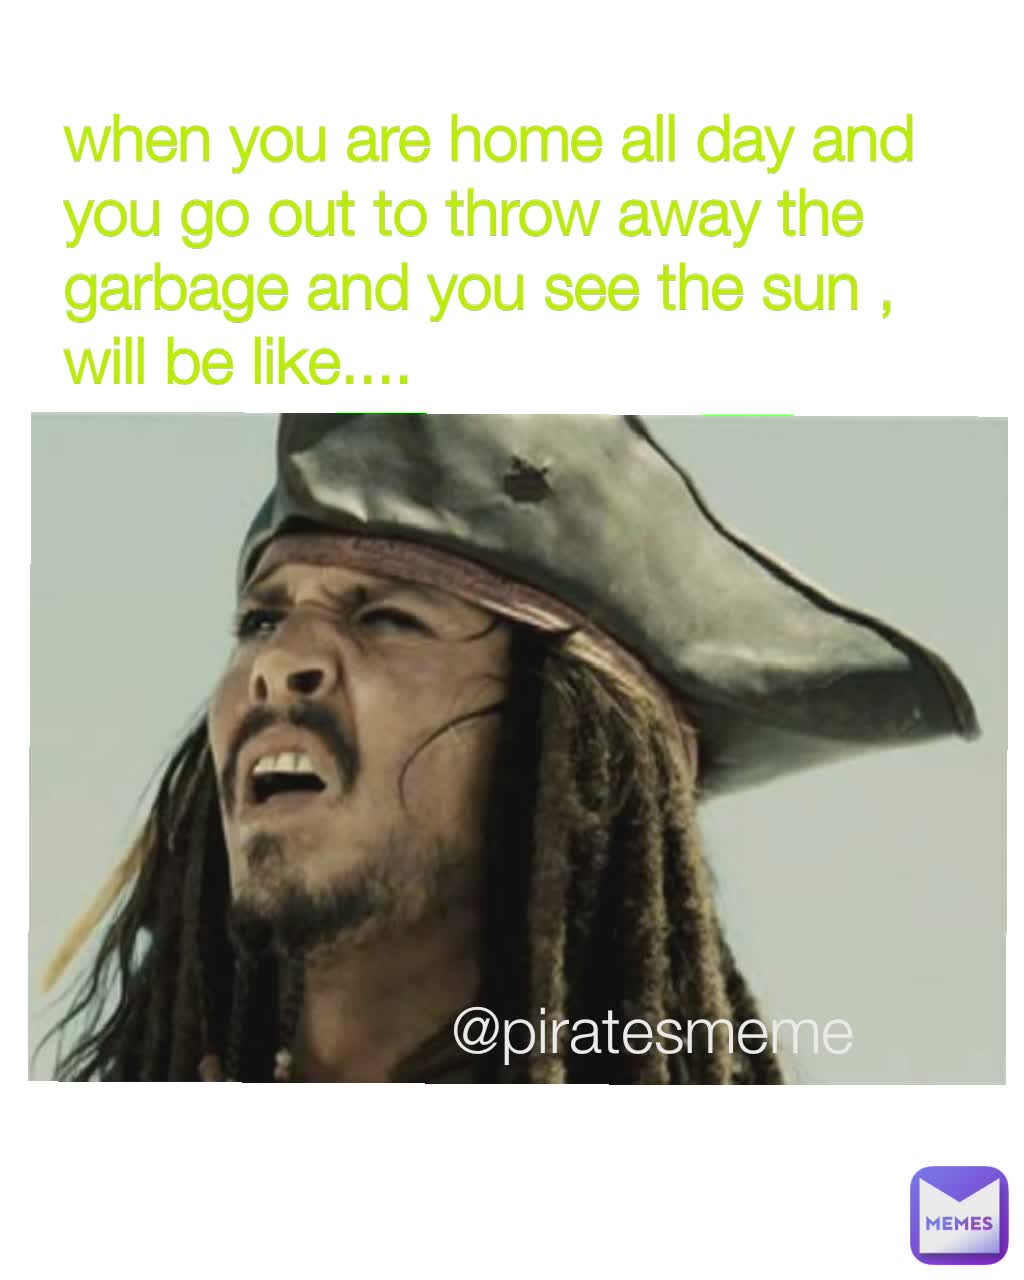 @piratesmeme when you are home all day and you go out to throw away the garbage and you see the sun , will be like....